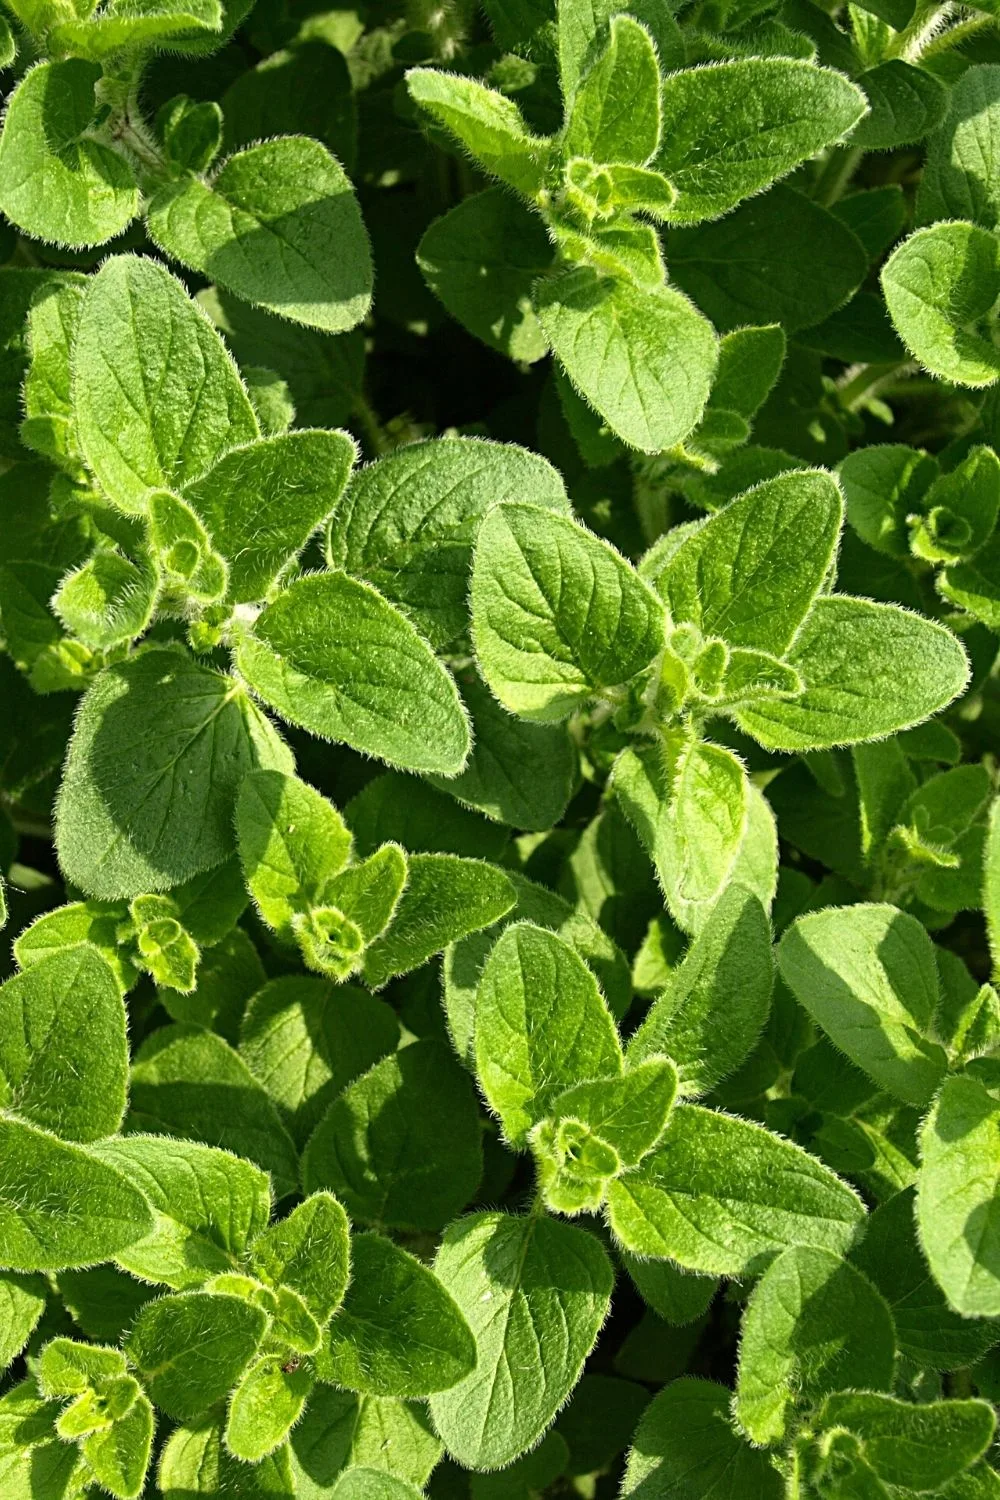 Oregano is another great-tasting herb that you can add to your beautiful south-facing balcony collection